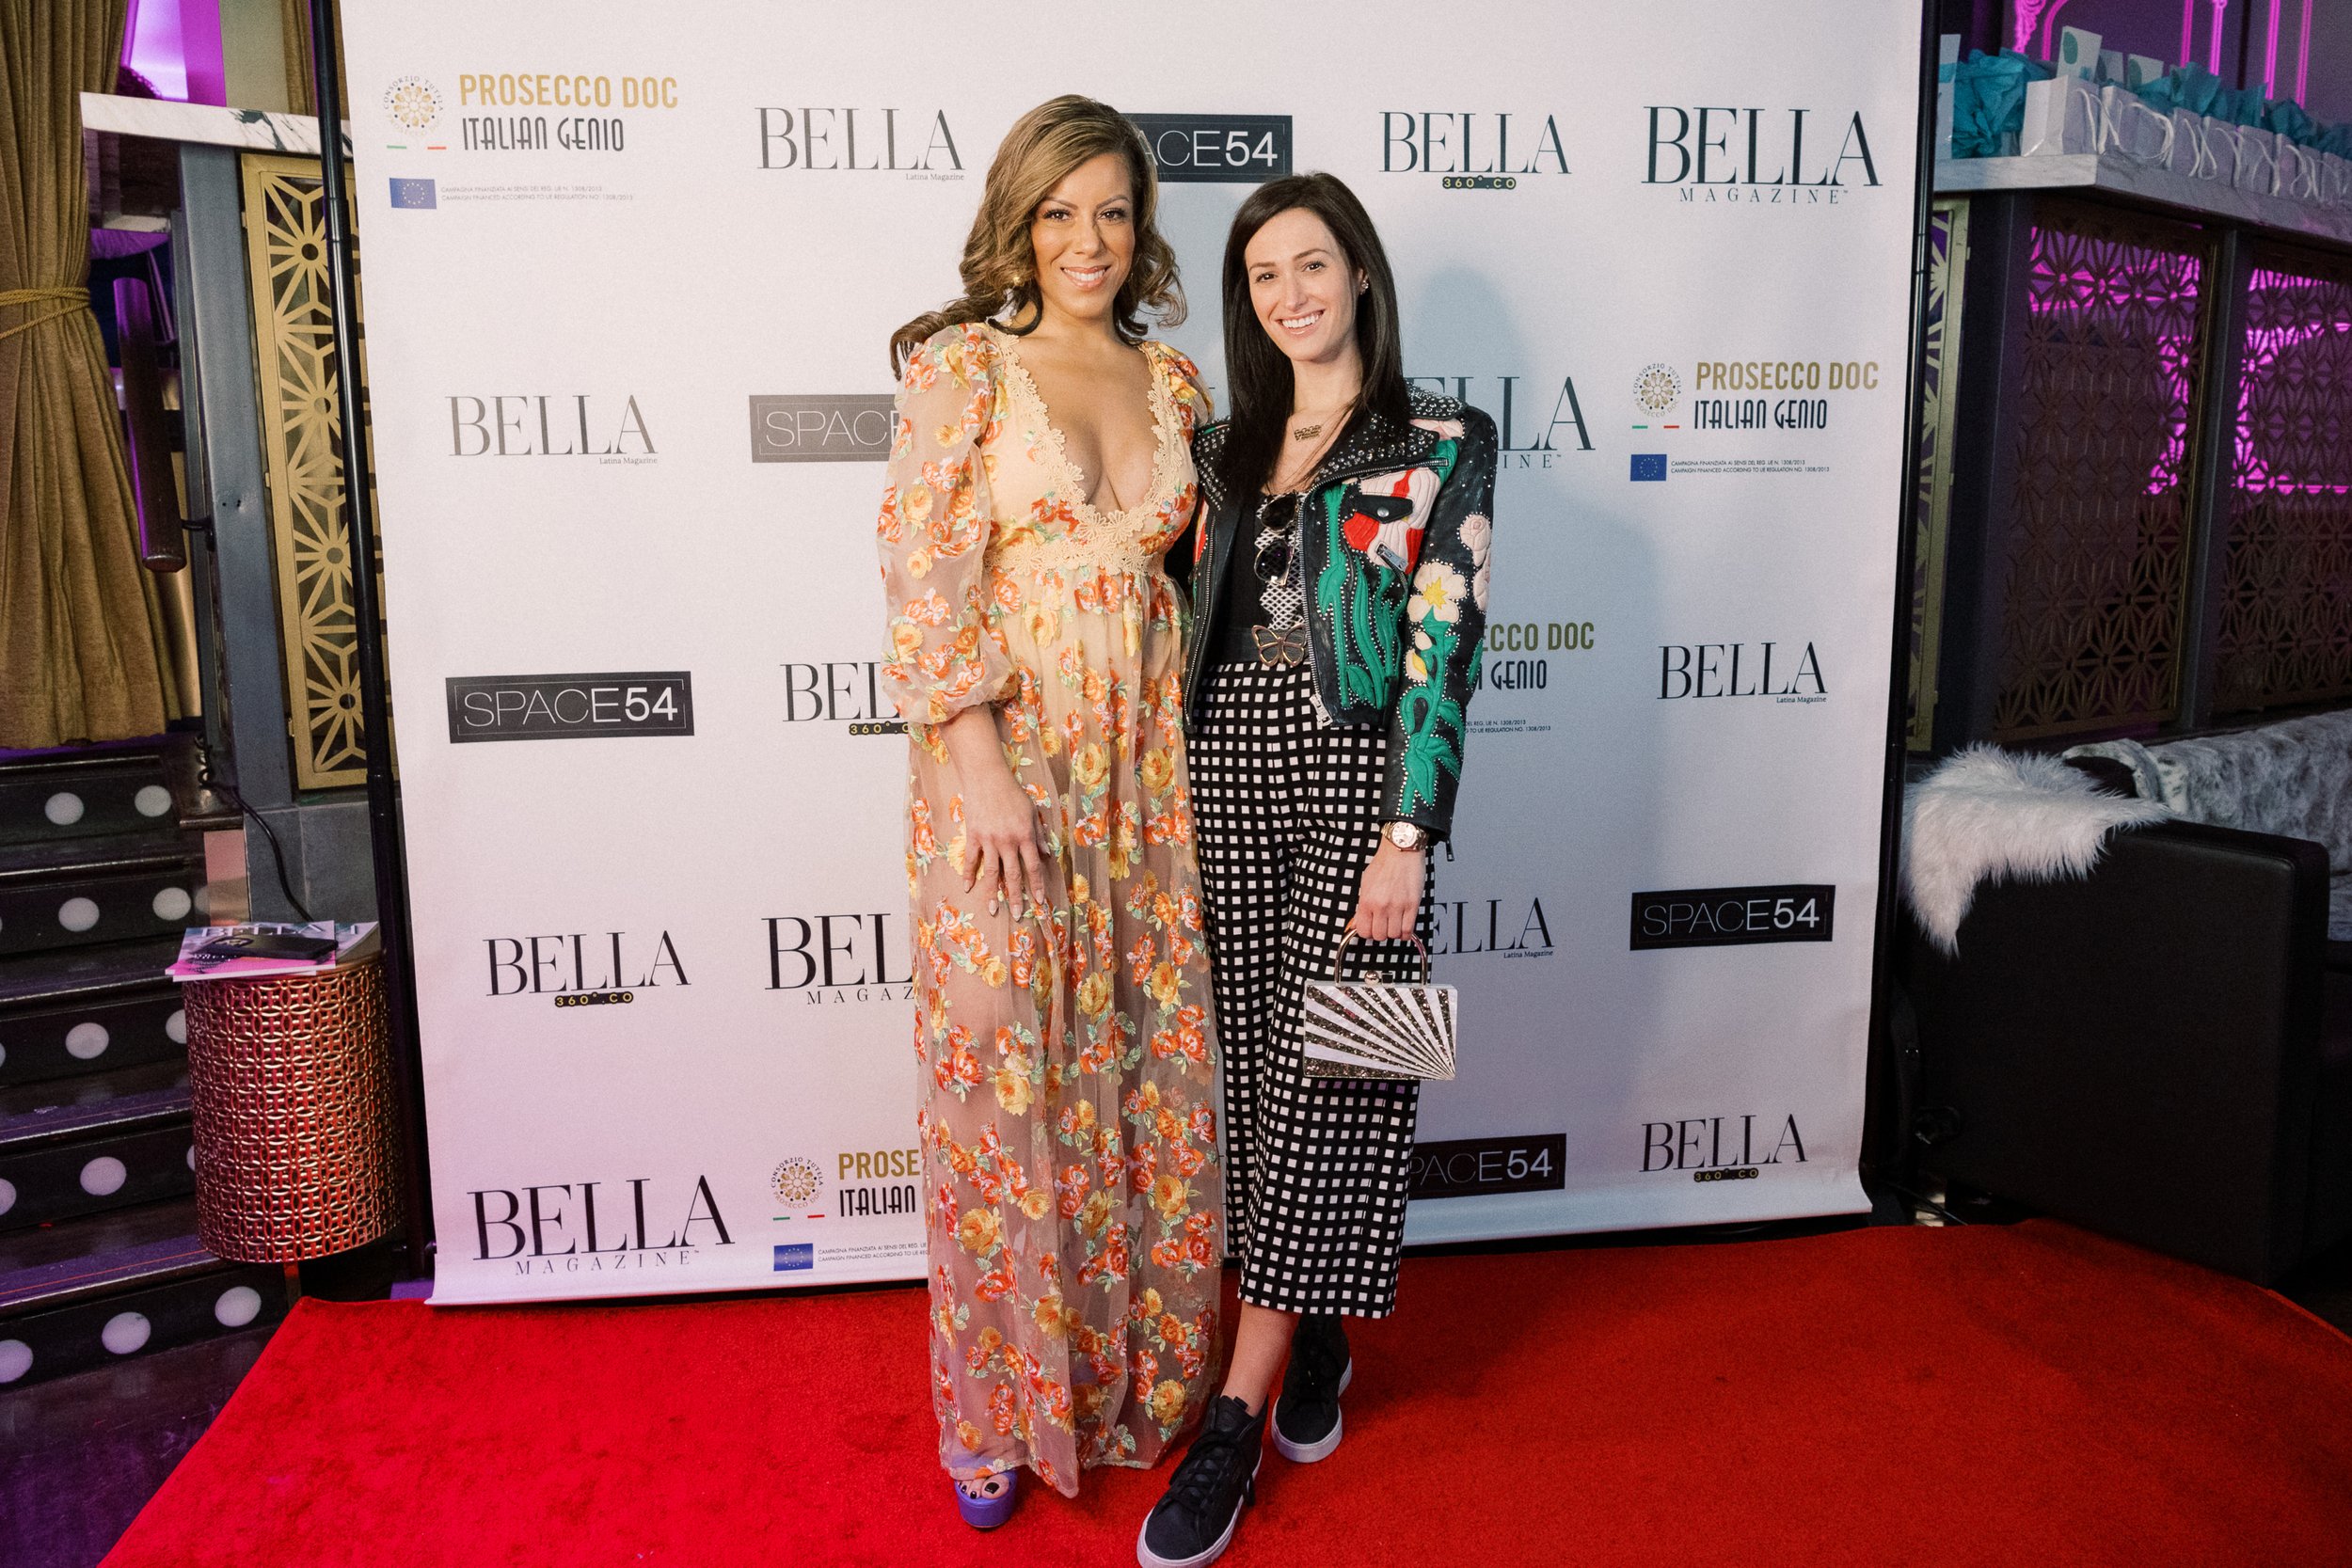 Michelle-Behre-Creative-Co-BELLA-Magazine-Co-Women-of-Influence-Cover-Party-Space54-NYC-8.jpg